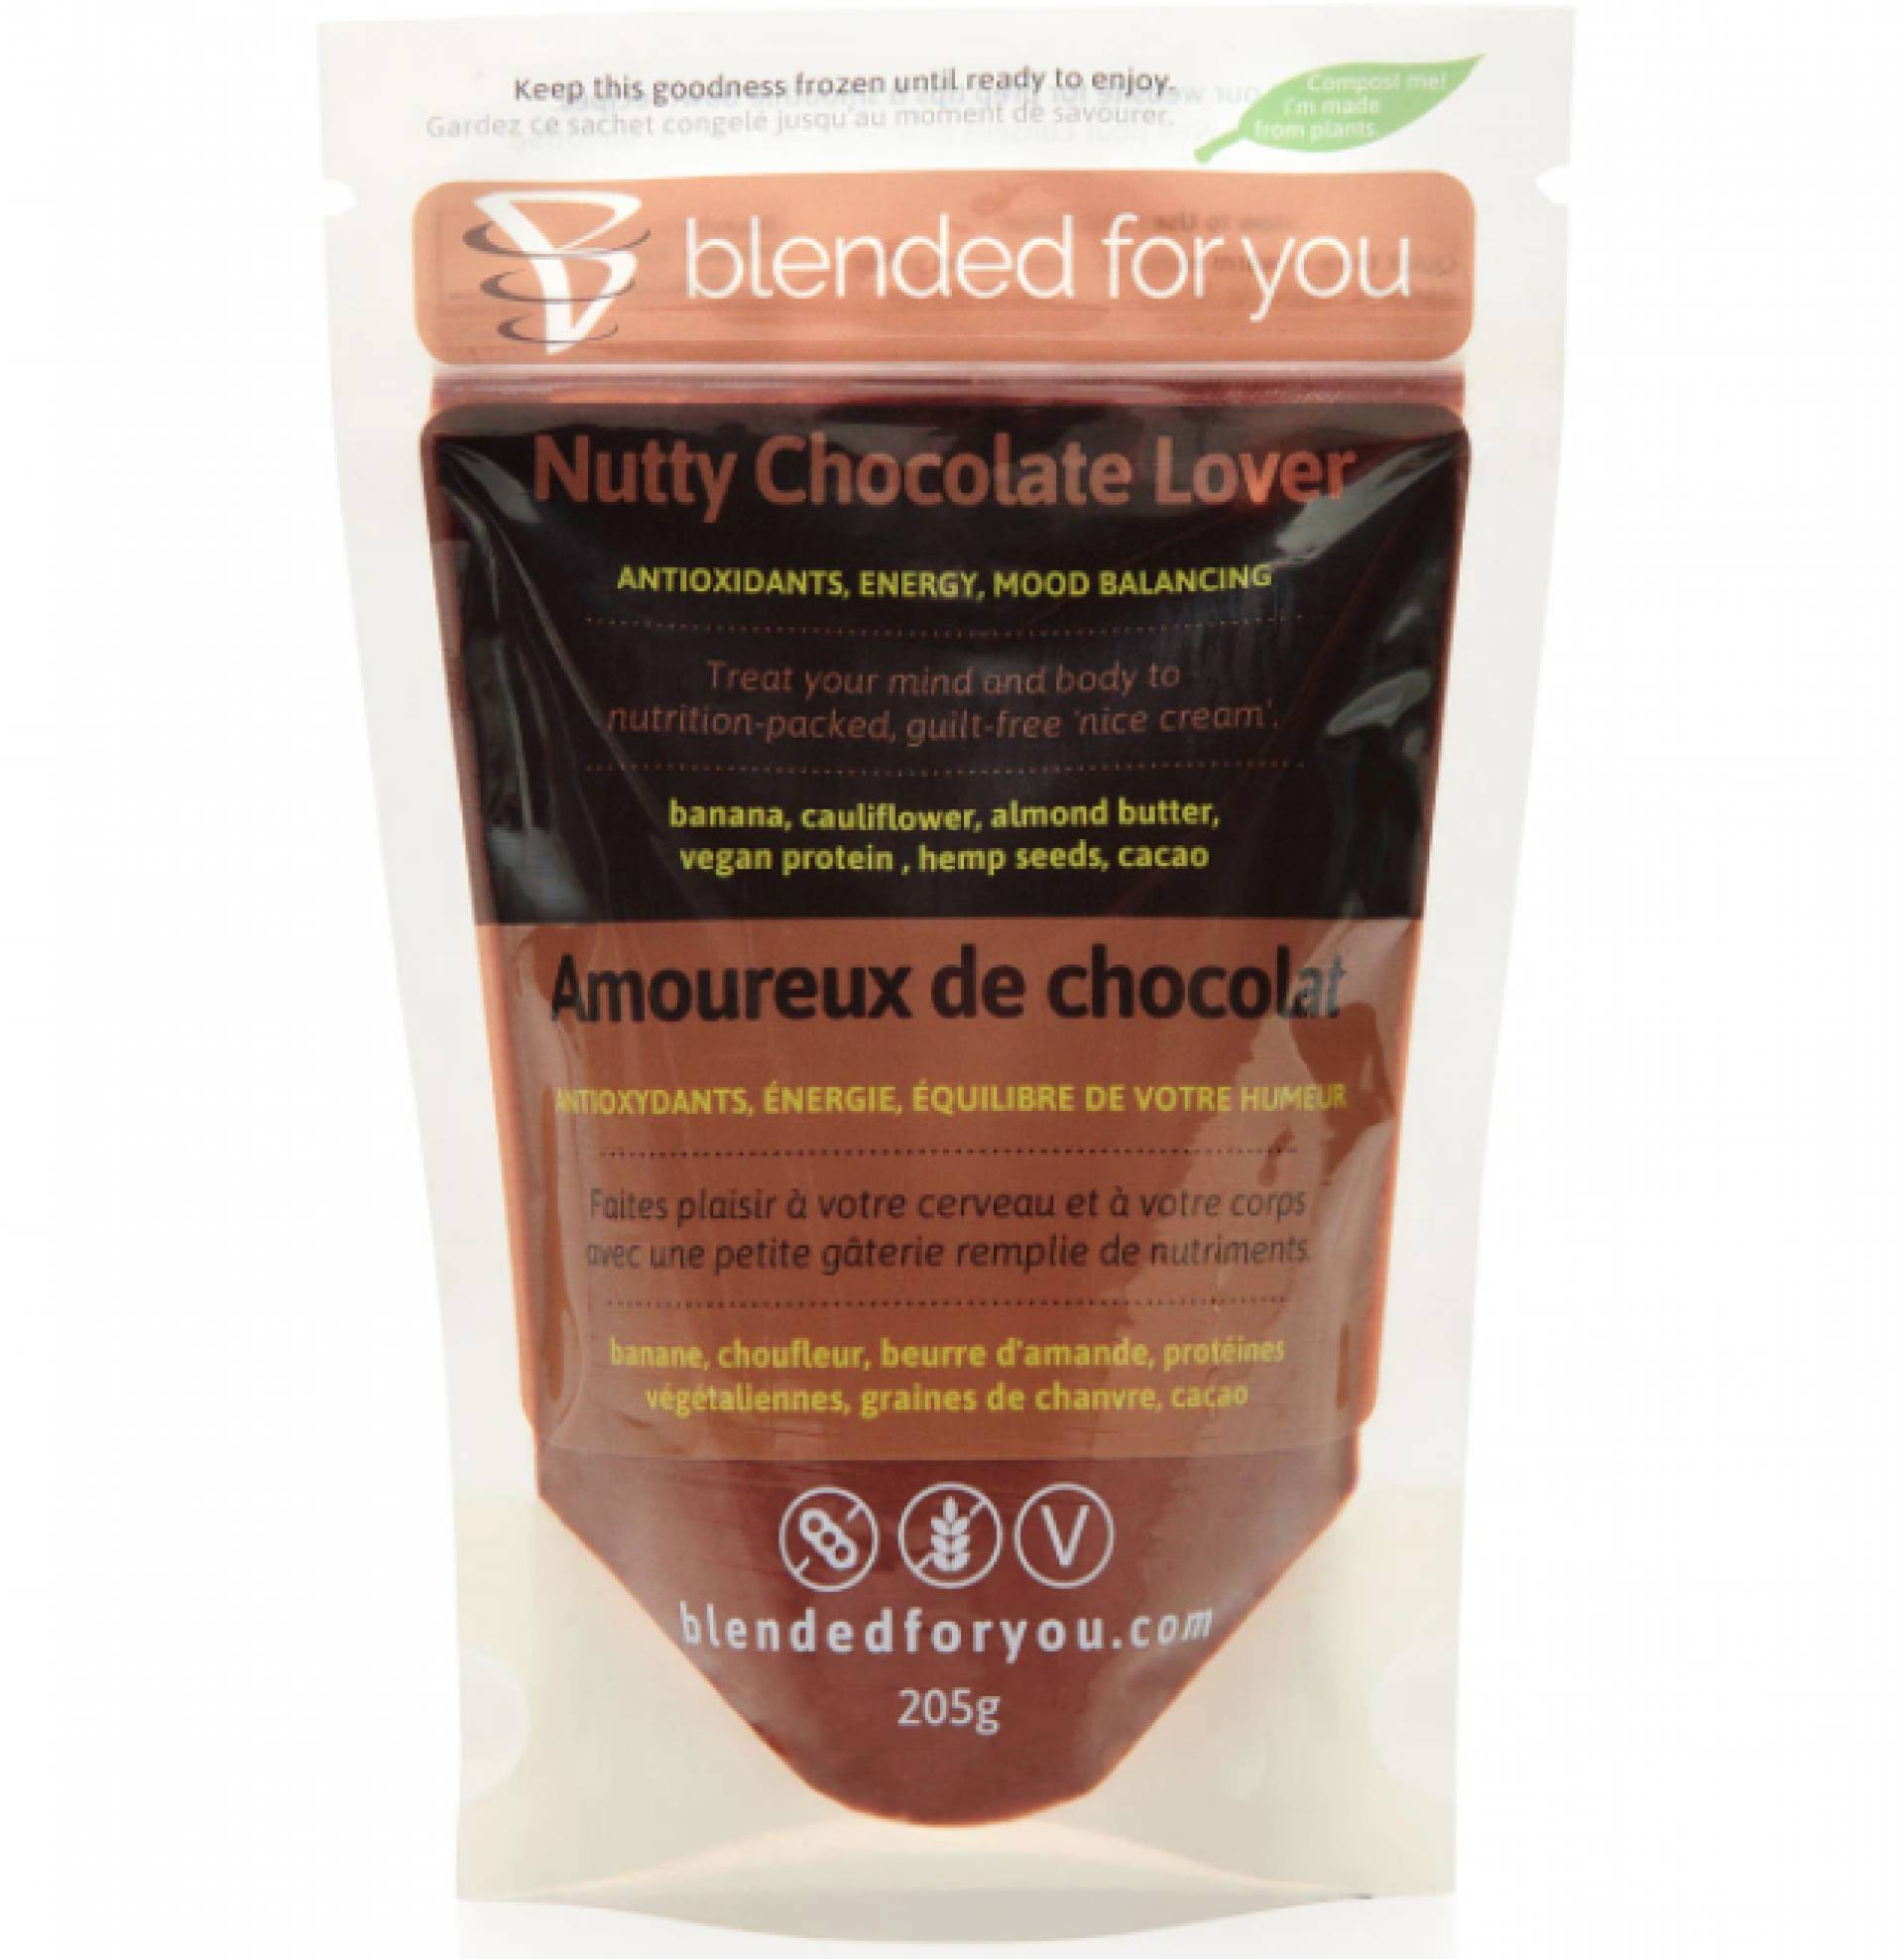 The Nutty Chocolate Lover Smoothie